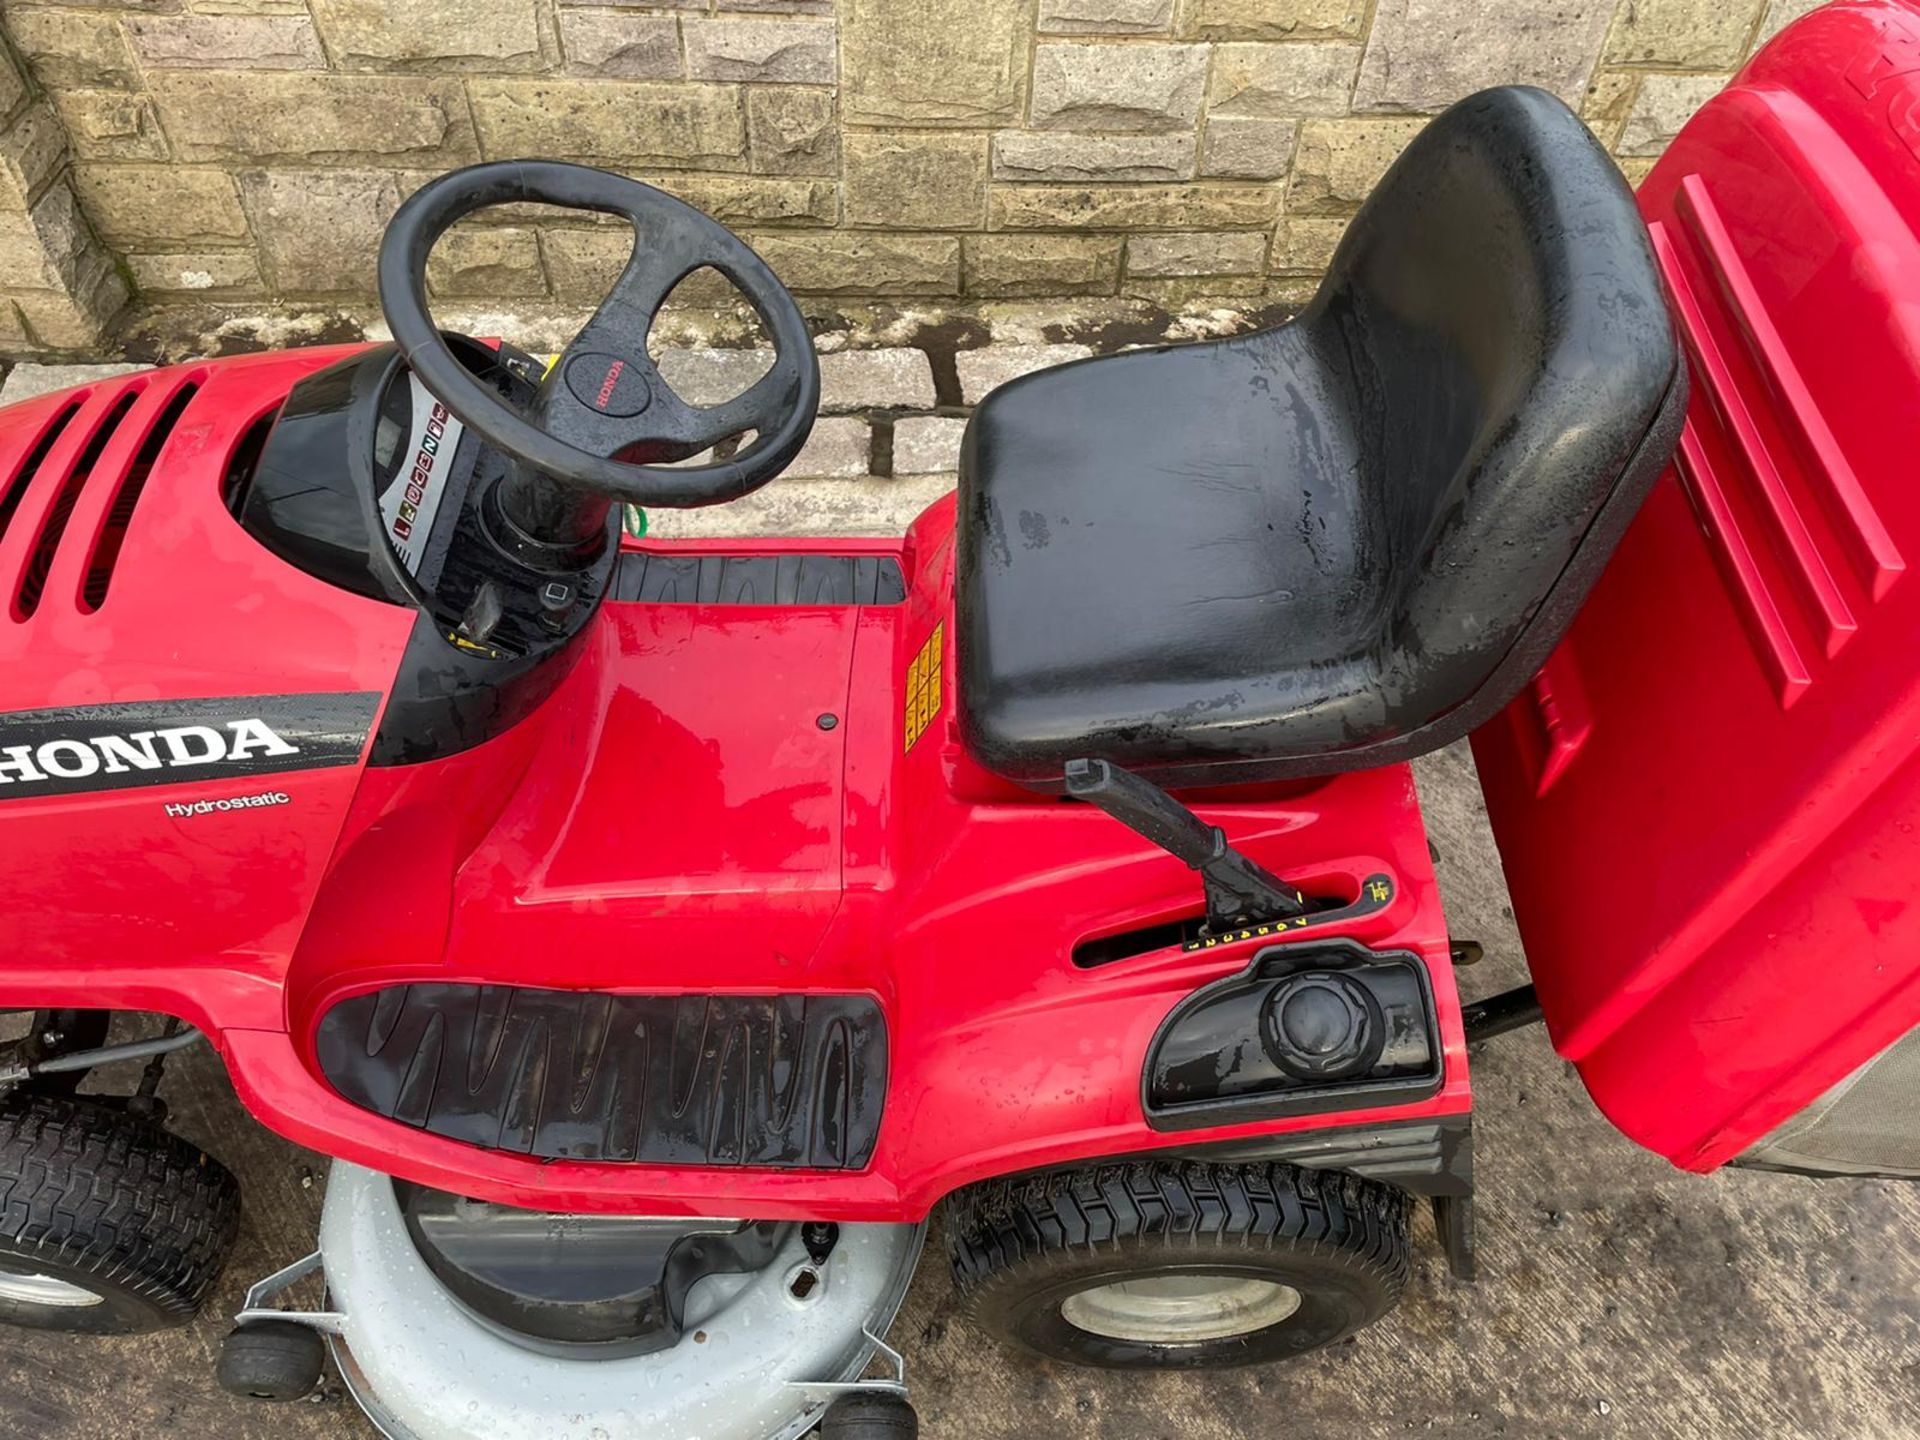 HONDA 2620 V TWIN RIDE ON MOWER, RUNS, DRIVES AND CUTS, CLEAN MACHINE, ELECTRIC COLLECTOR *NO VAT* - Image 7 of 7